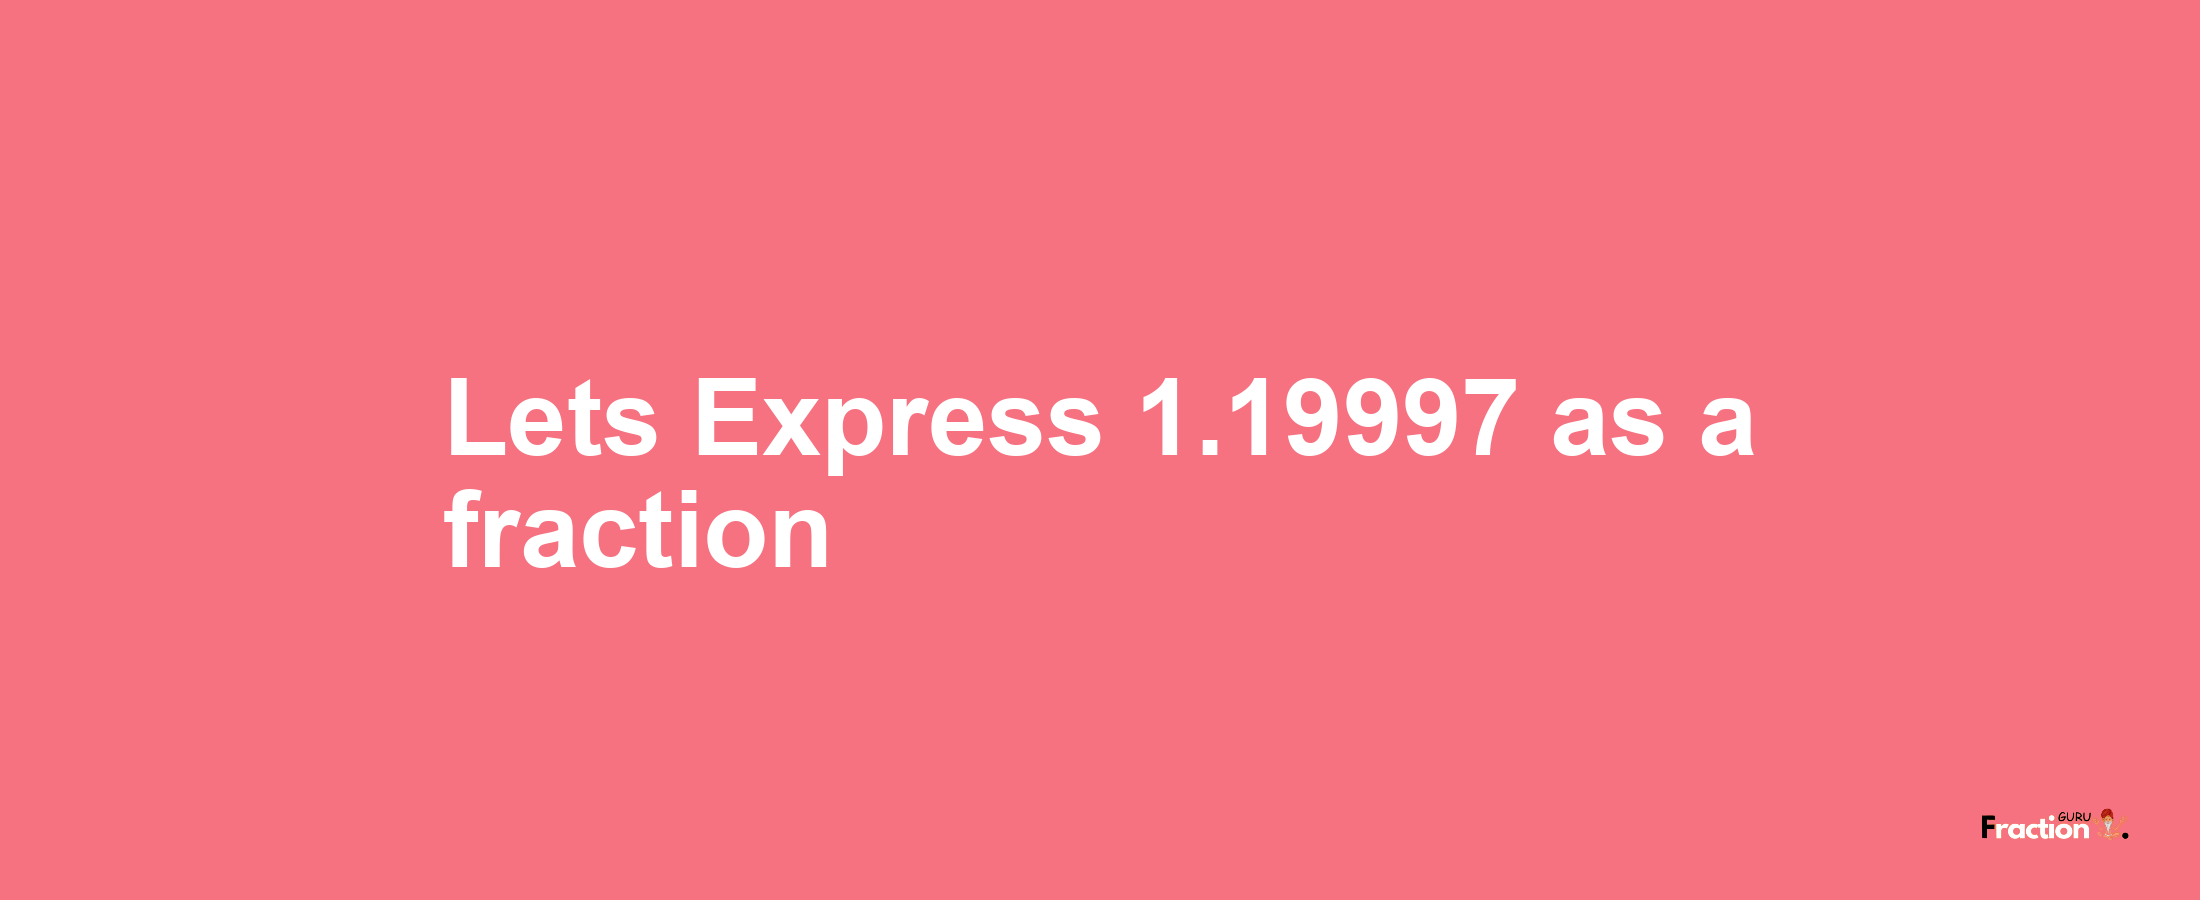 Lets Express 1.19997 as afraction